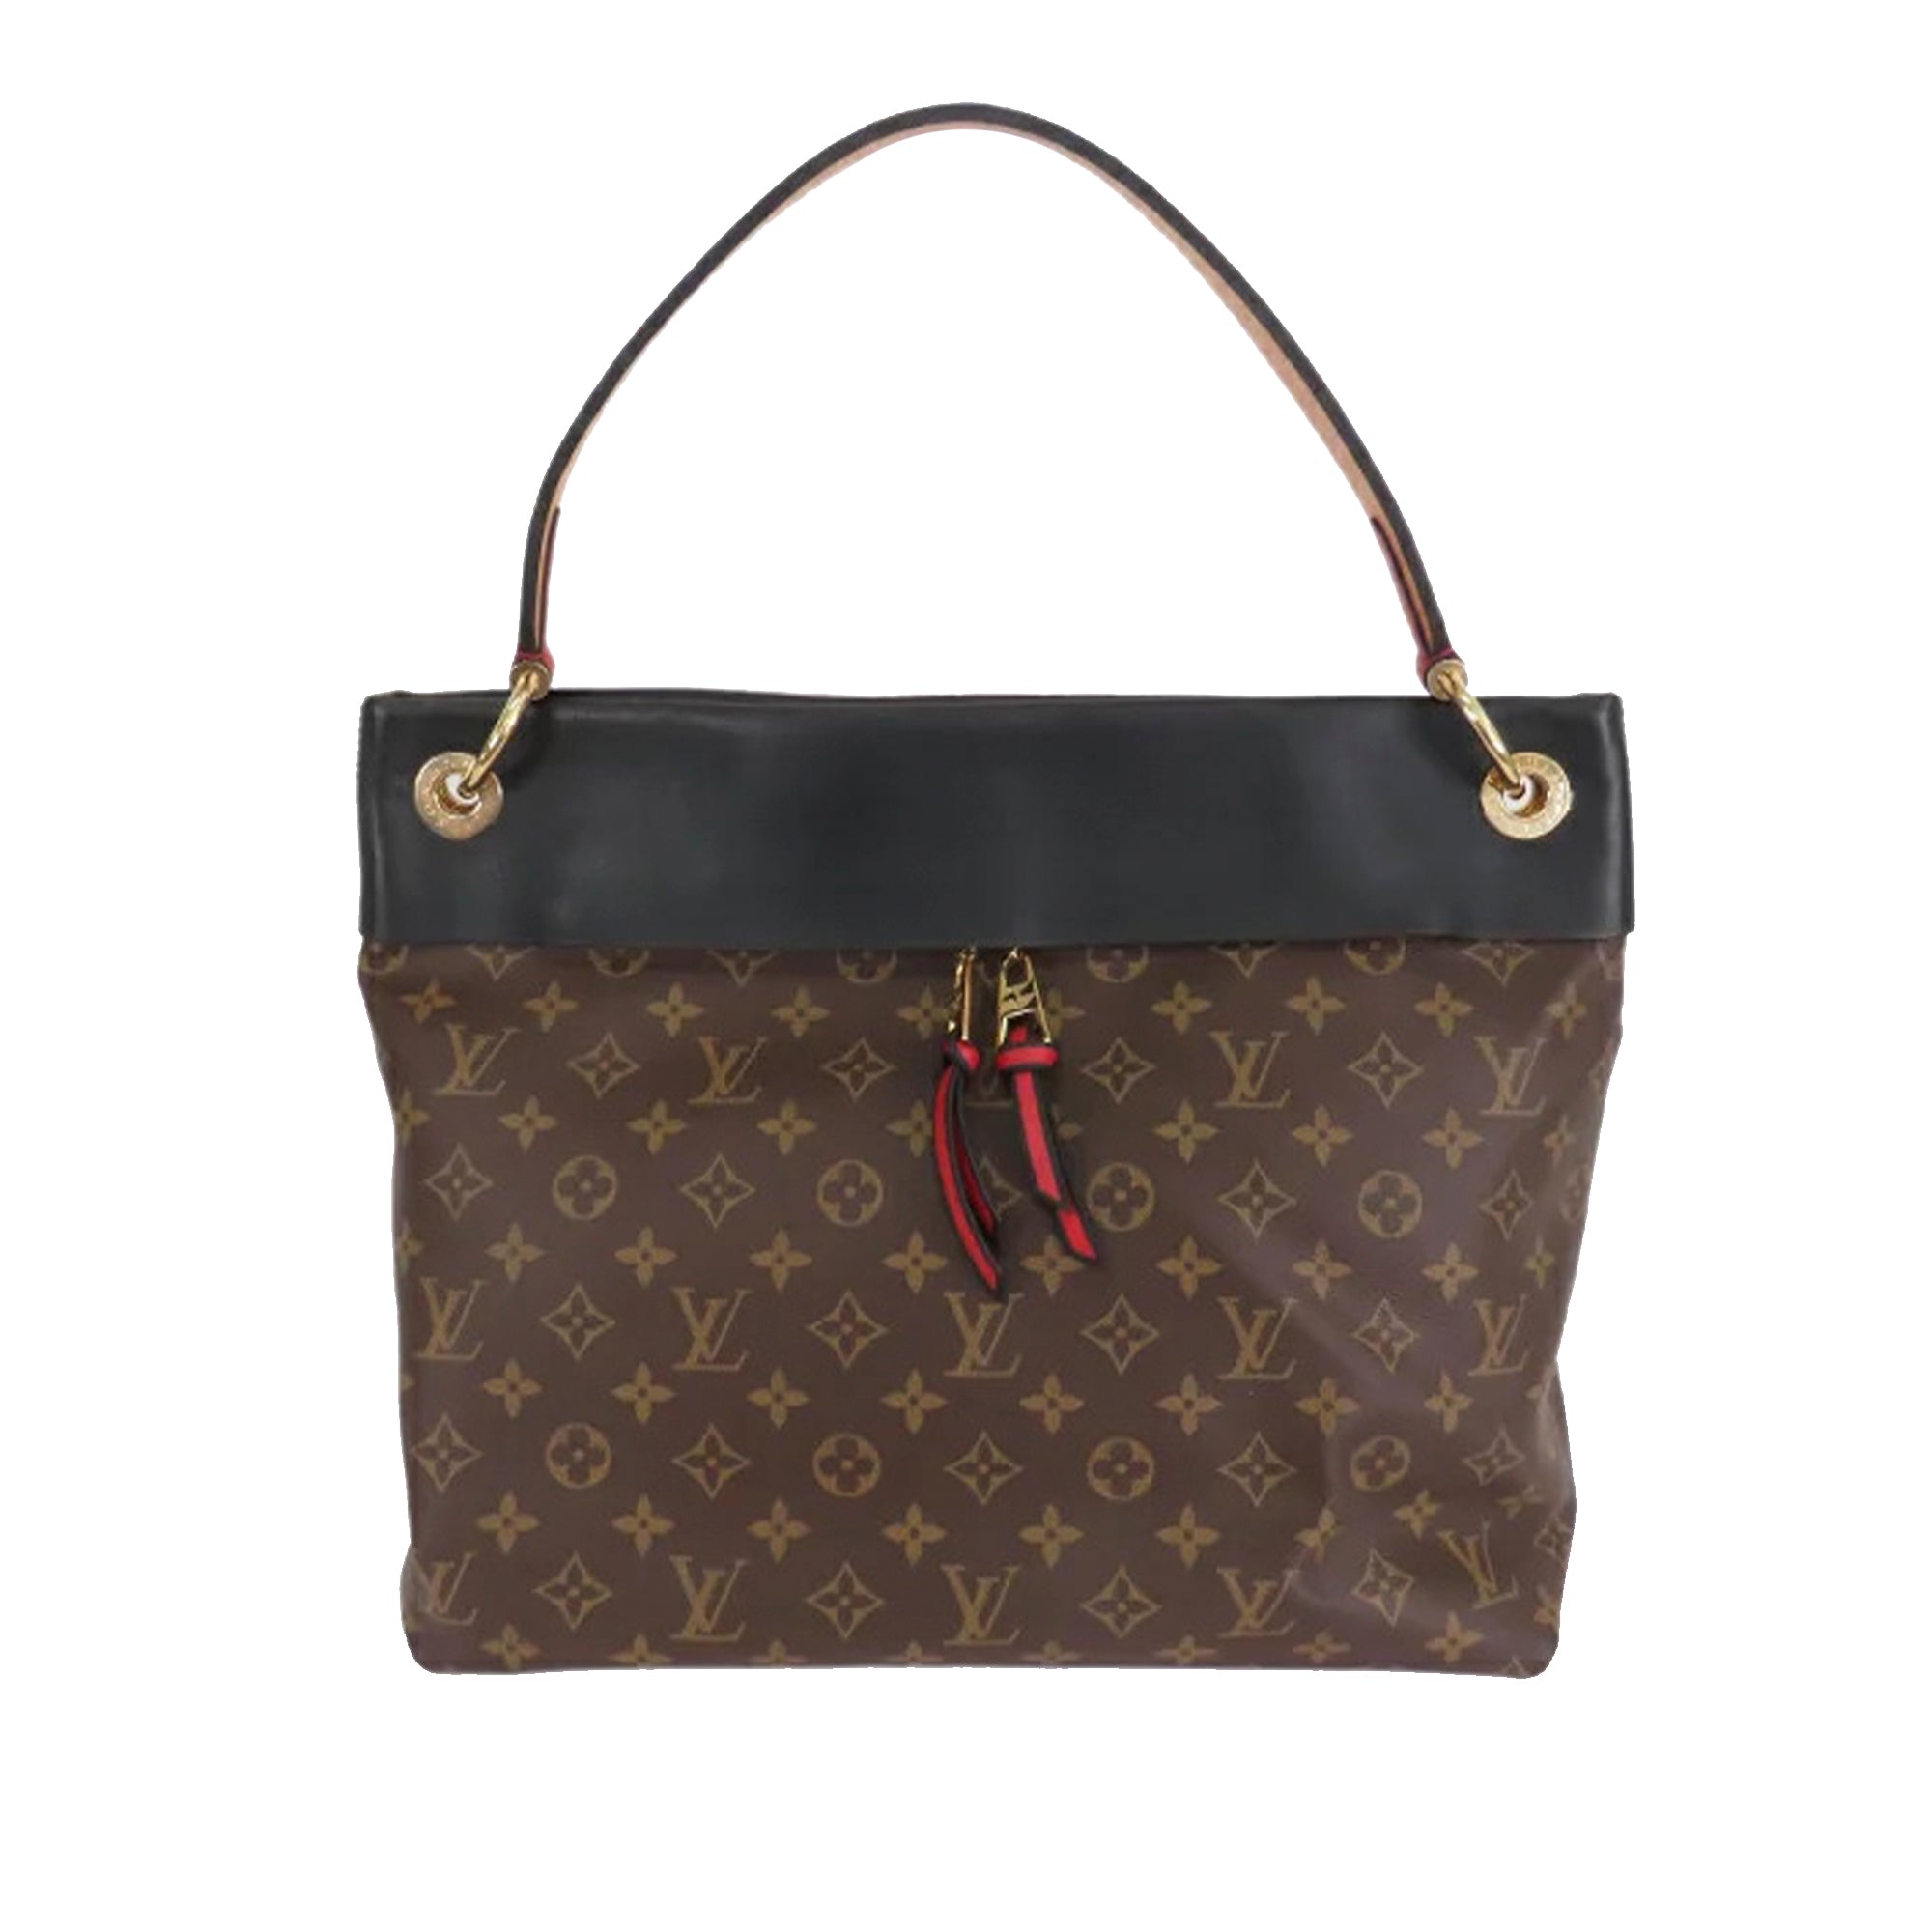 Louis Vuitton pre-owned Keepall 45 holdall bag